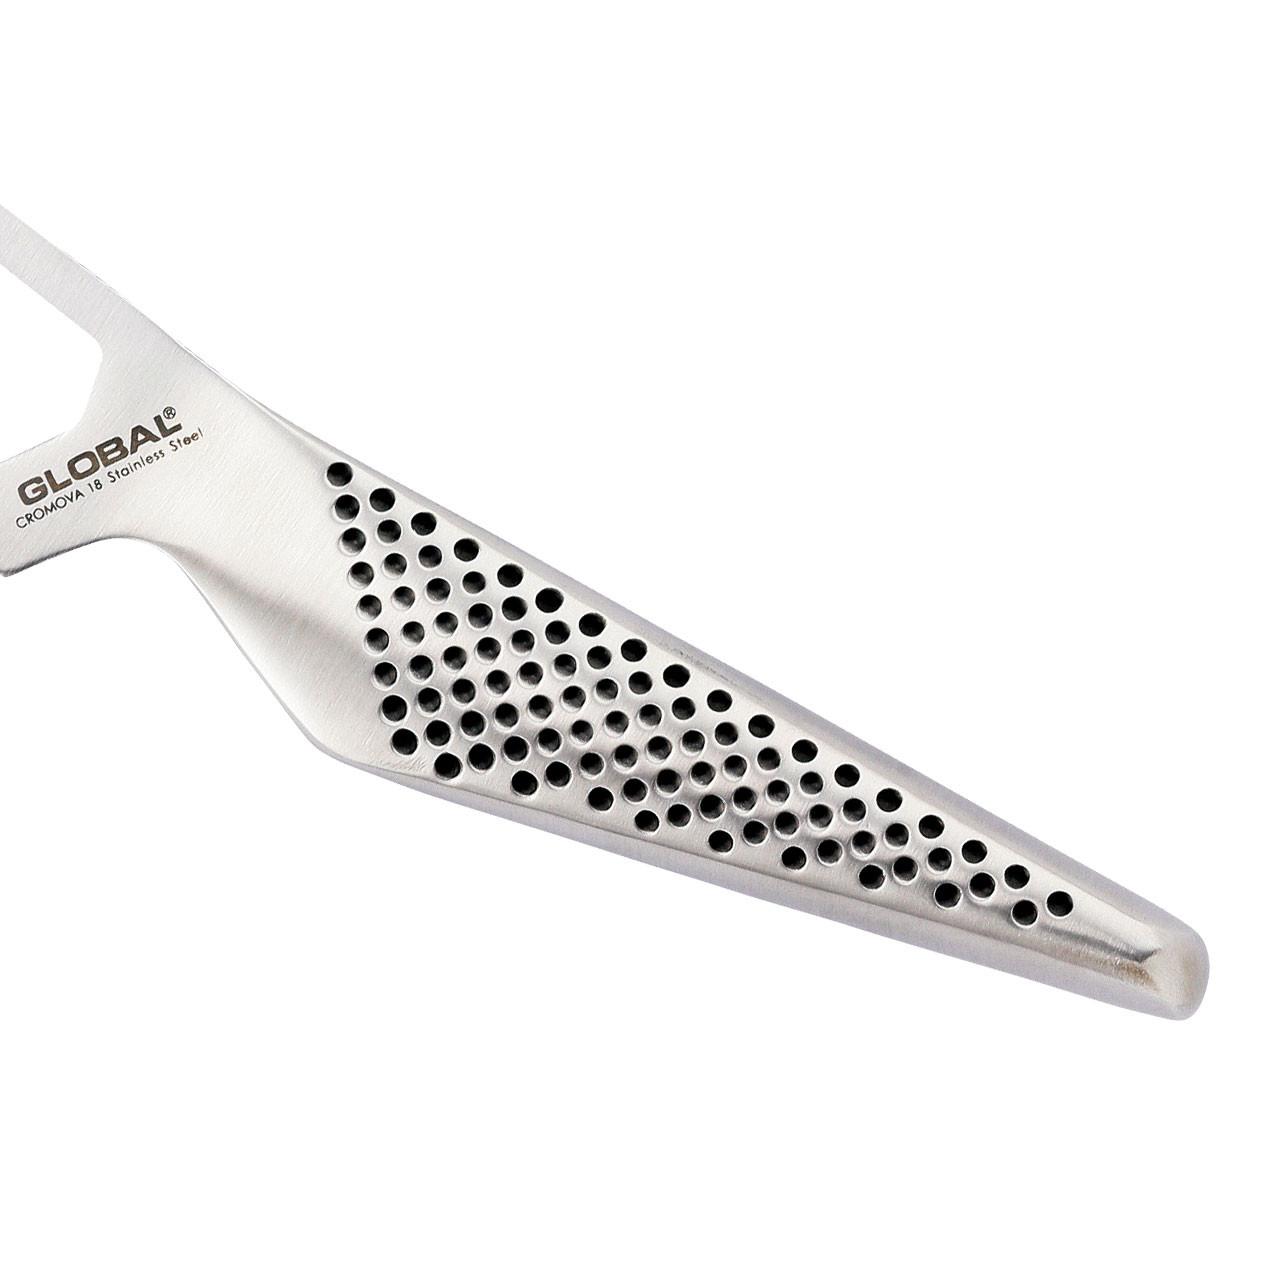 Global GS-10 Cheese Knife 14cm Image 3